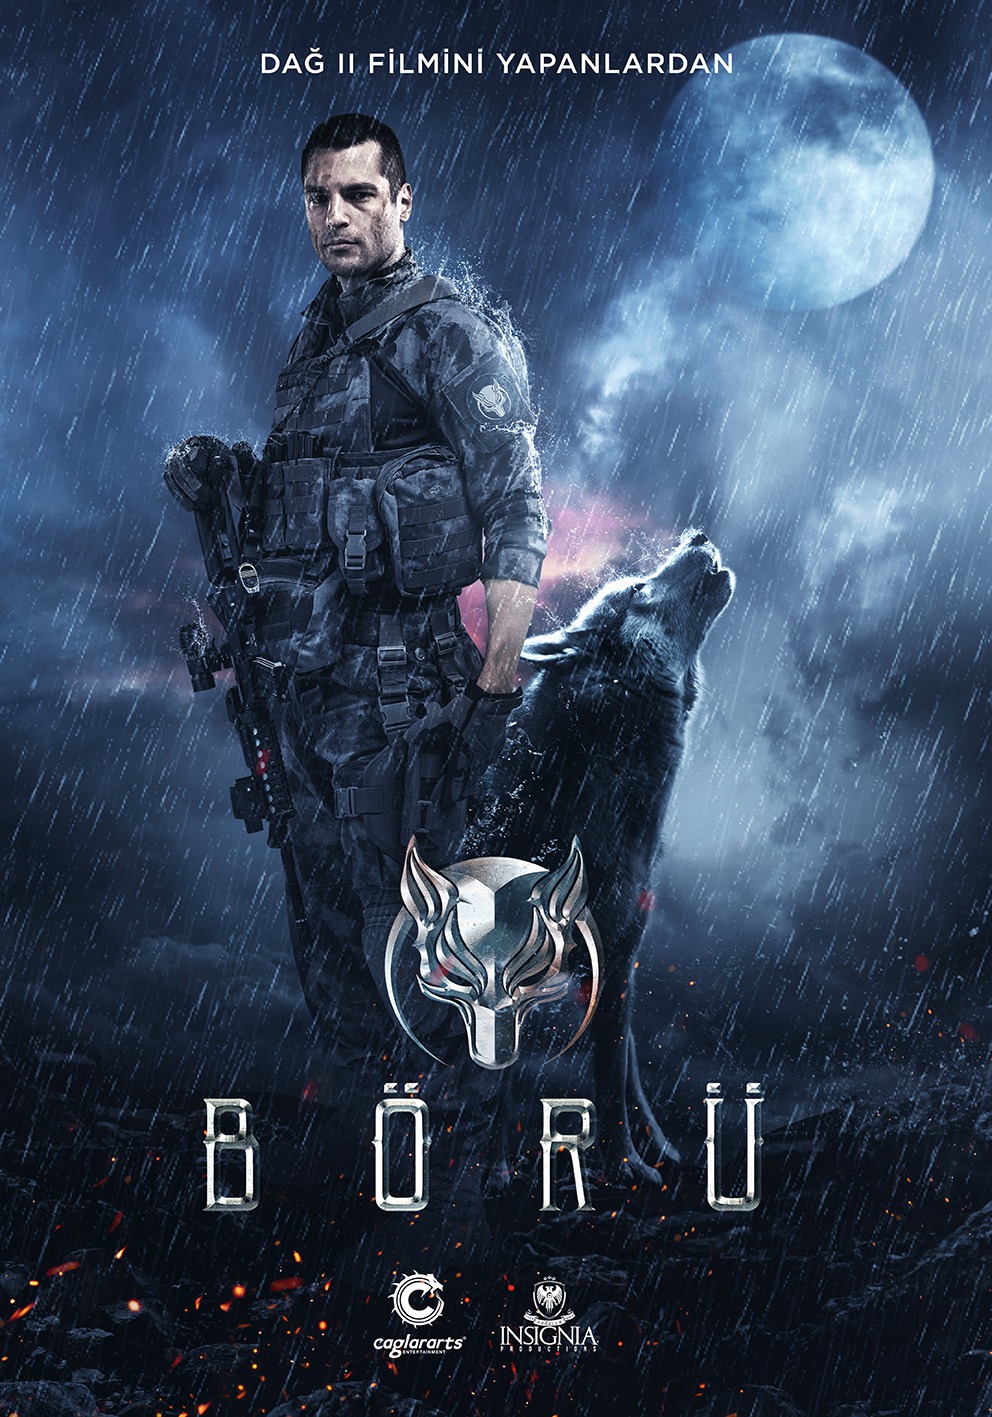 Extra Large TV Poster Image for Börü (#4 of 4)